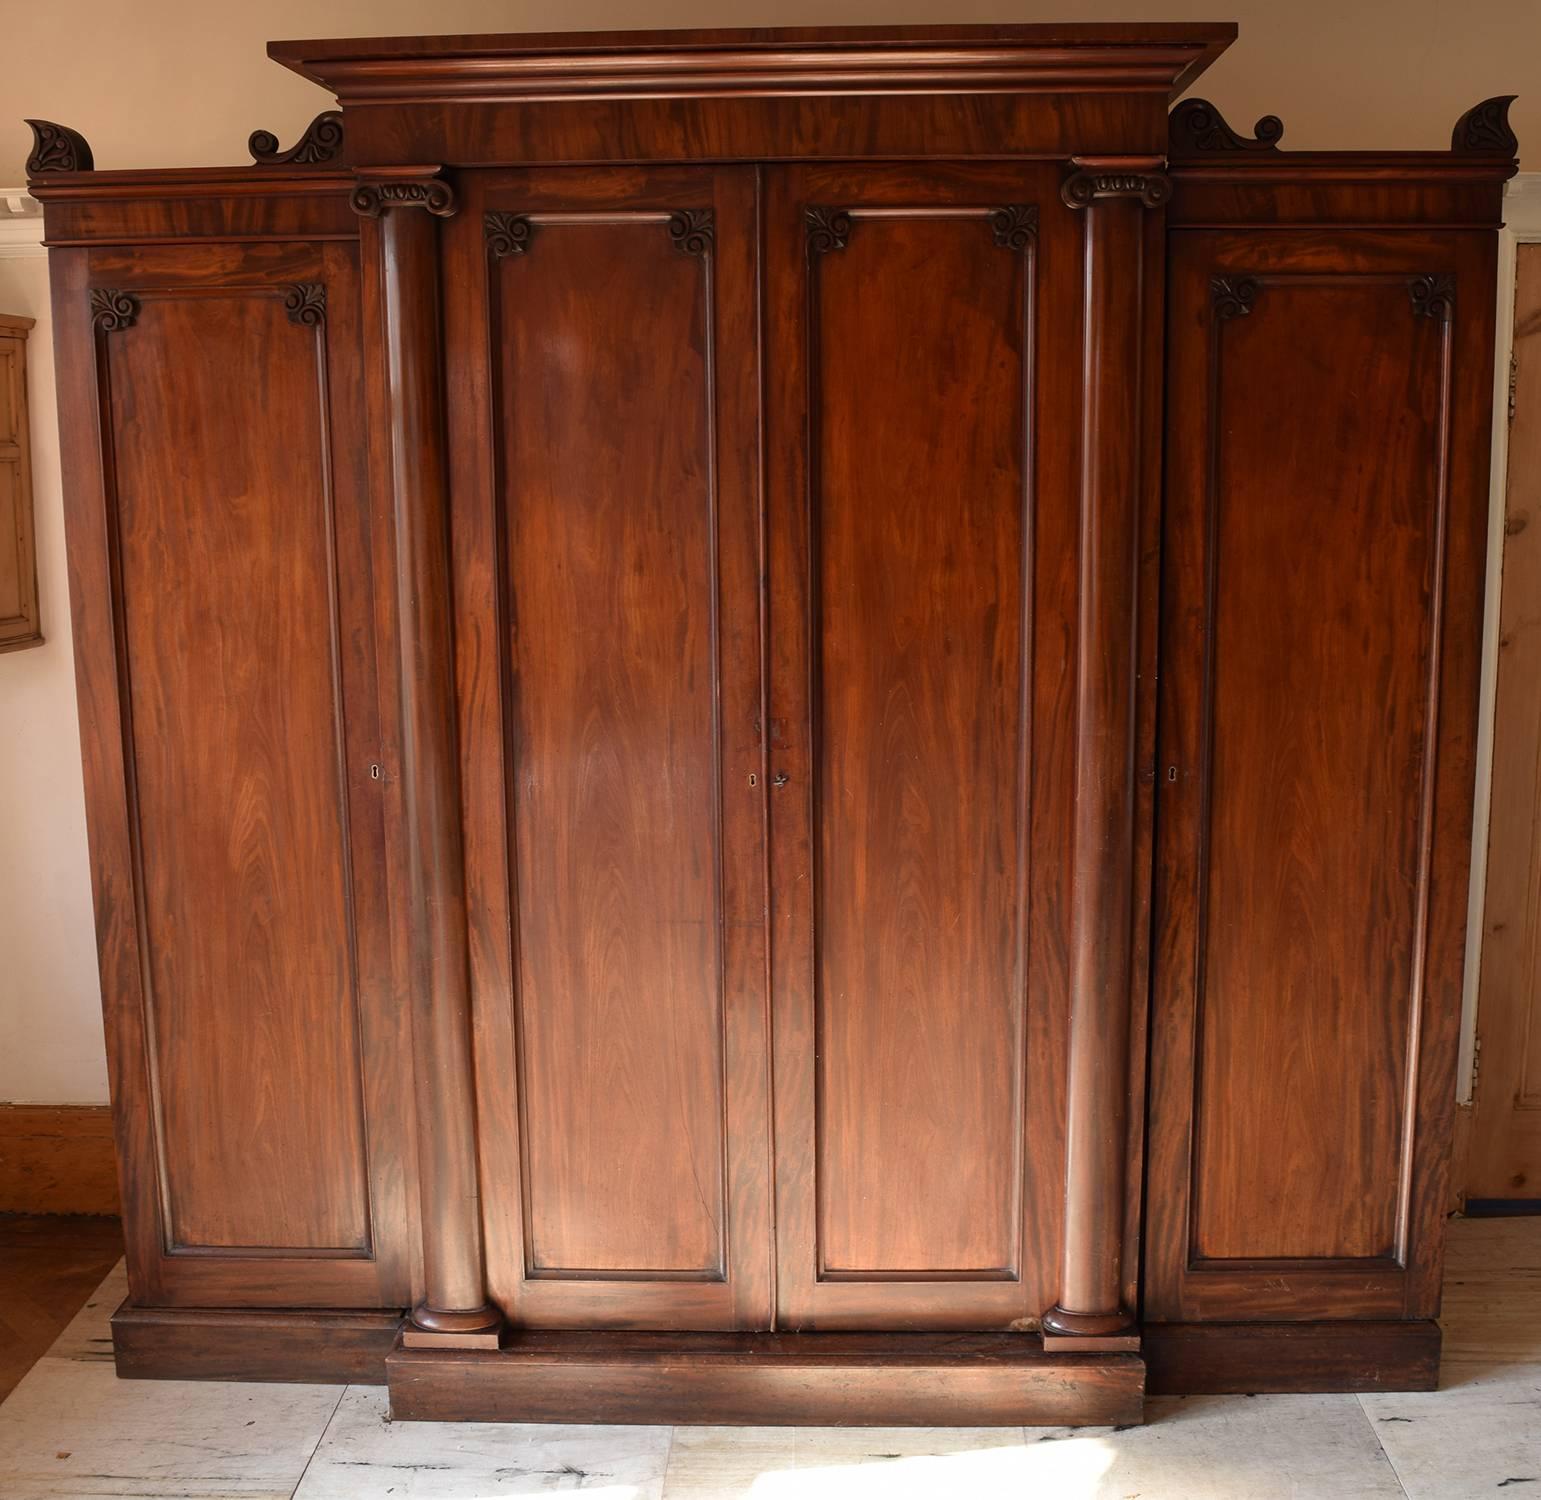 
An exceptional William IV four door mahogany wardrobe or armoire.

Fabulous colour. The patina is original, it has not been re-polished.

Superb architectural details in the Greek style including the splendid Ionic columns.

It is made of